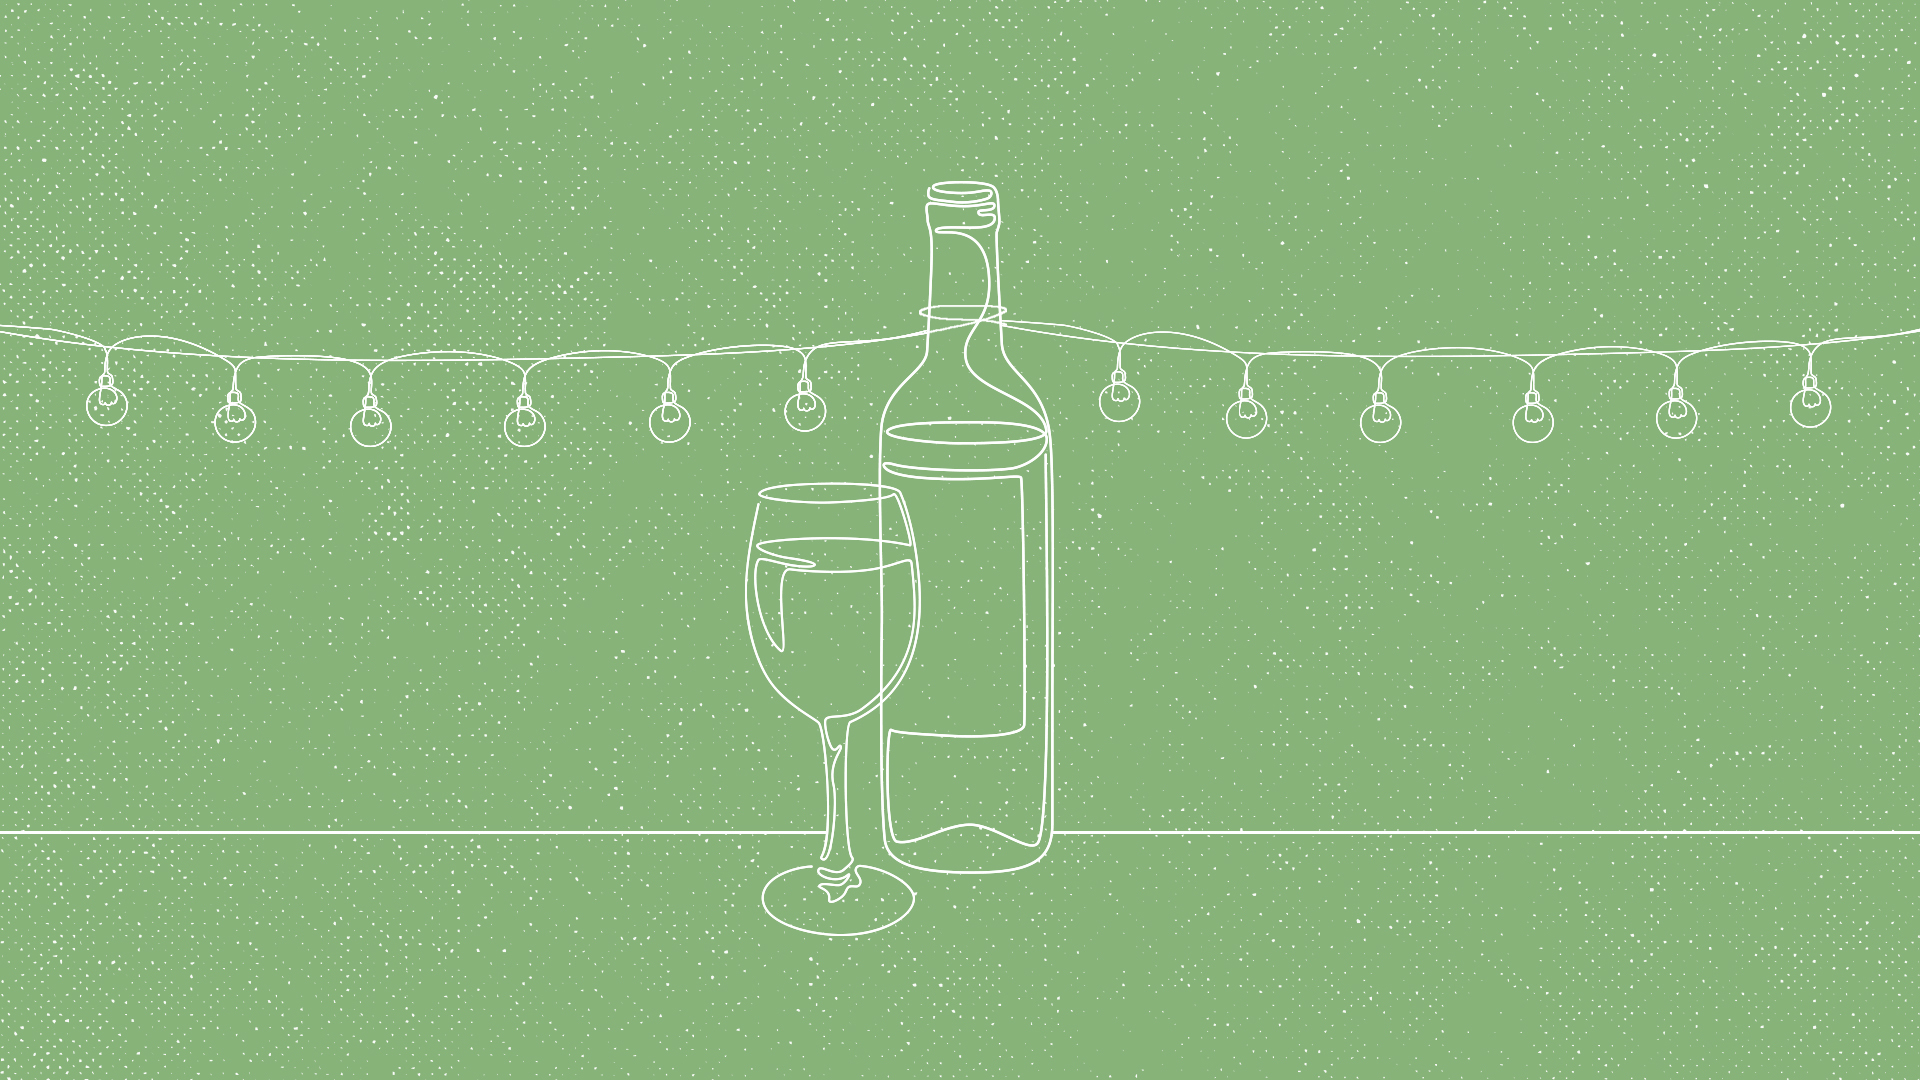 An illustration of a wine bottle and glass with a string of holiday lights